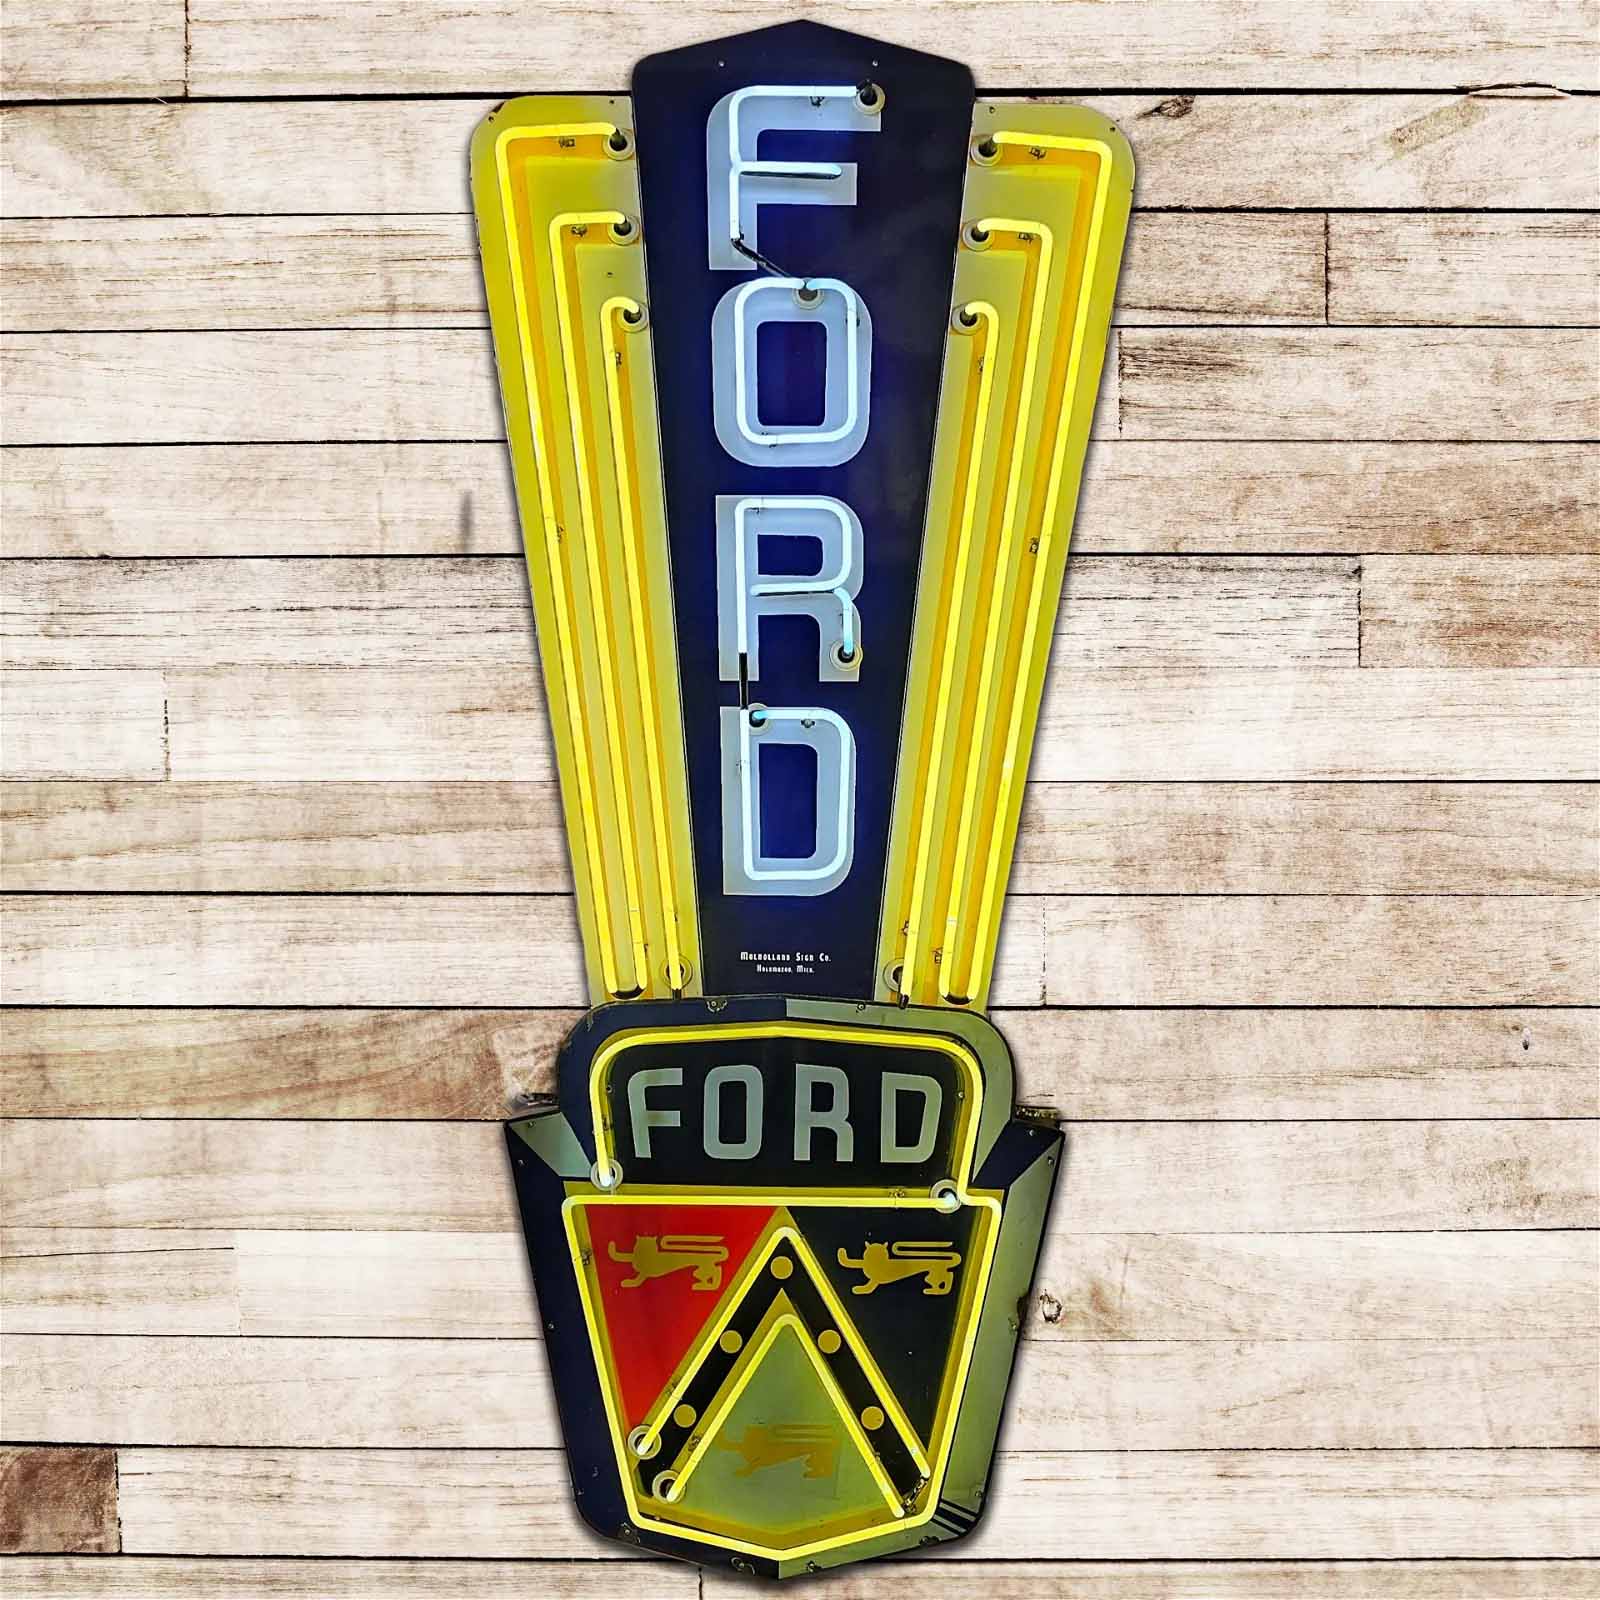 Ford Golden Jubilee single-sided porcelain and neon sign, which sold for $145,000 ($174,000 with buyer’s premium) at Richmond.